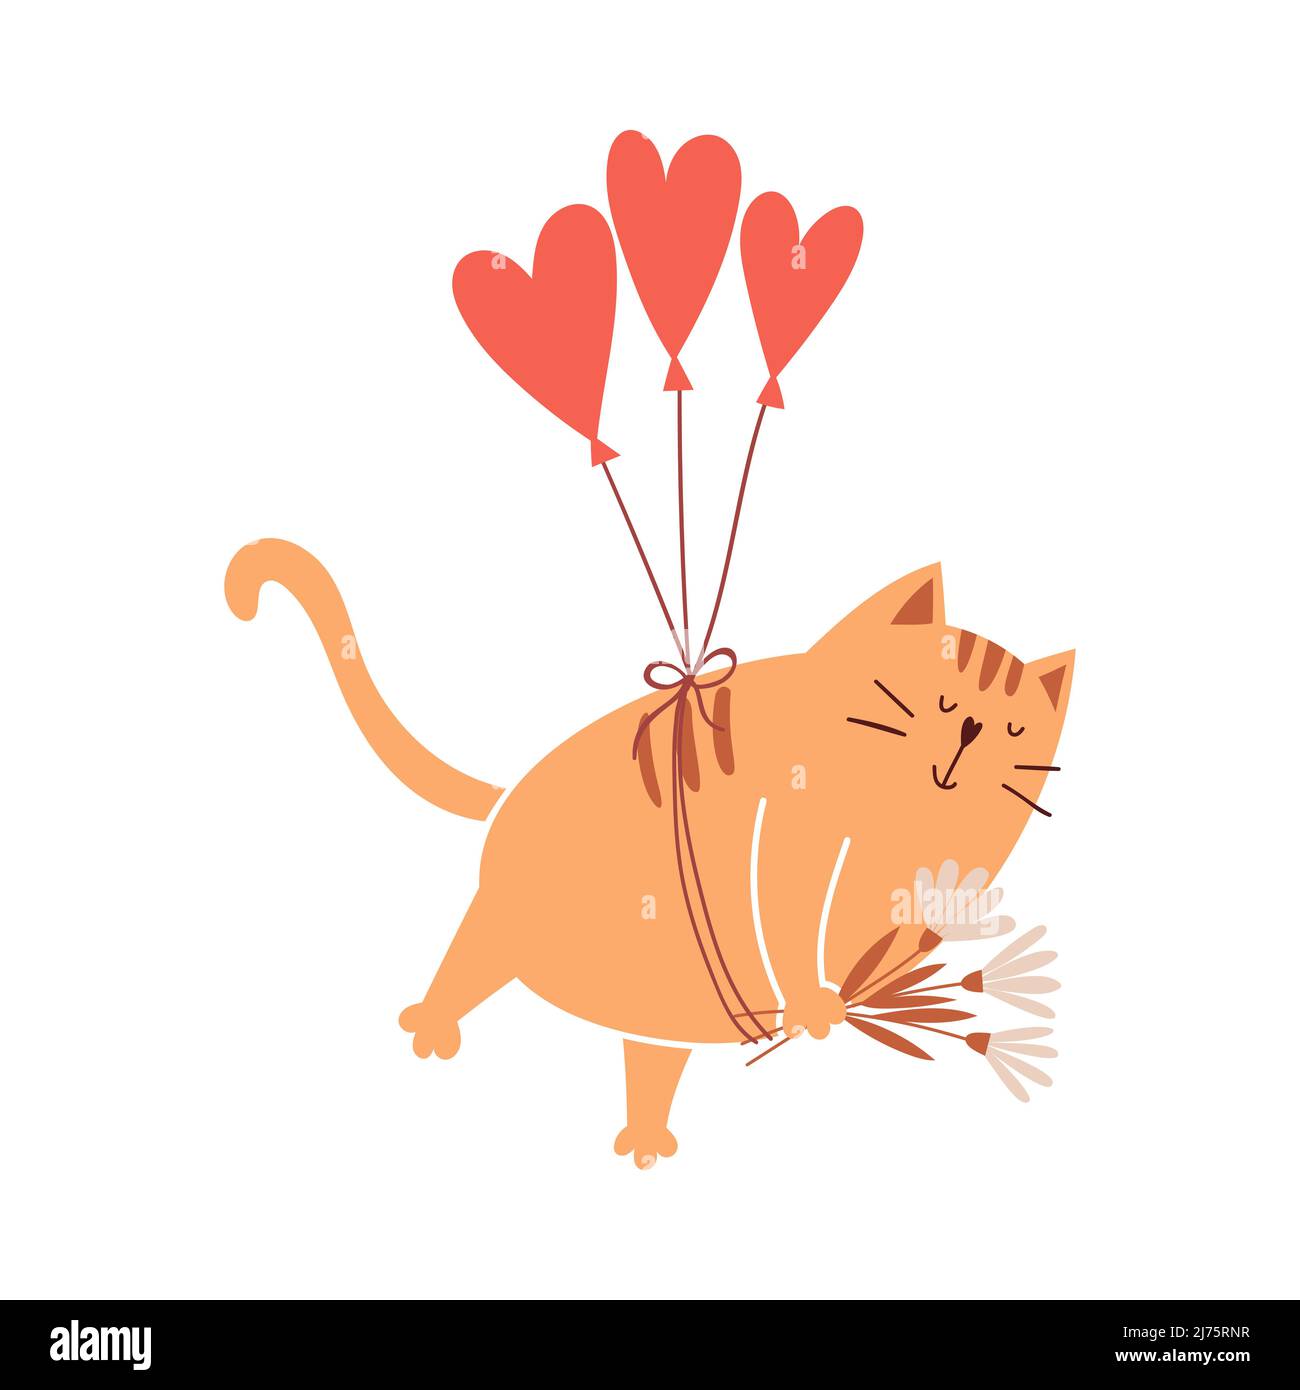 Cute cartoon cat flies on balloons in the shape of a heart and holds a bouquet of flowers in his paws. A simple adorable character for Valentine's day Stock Vector